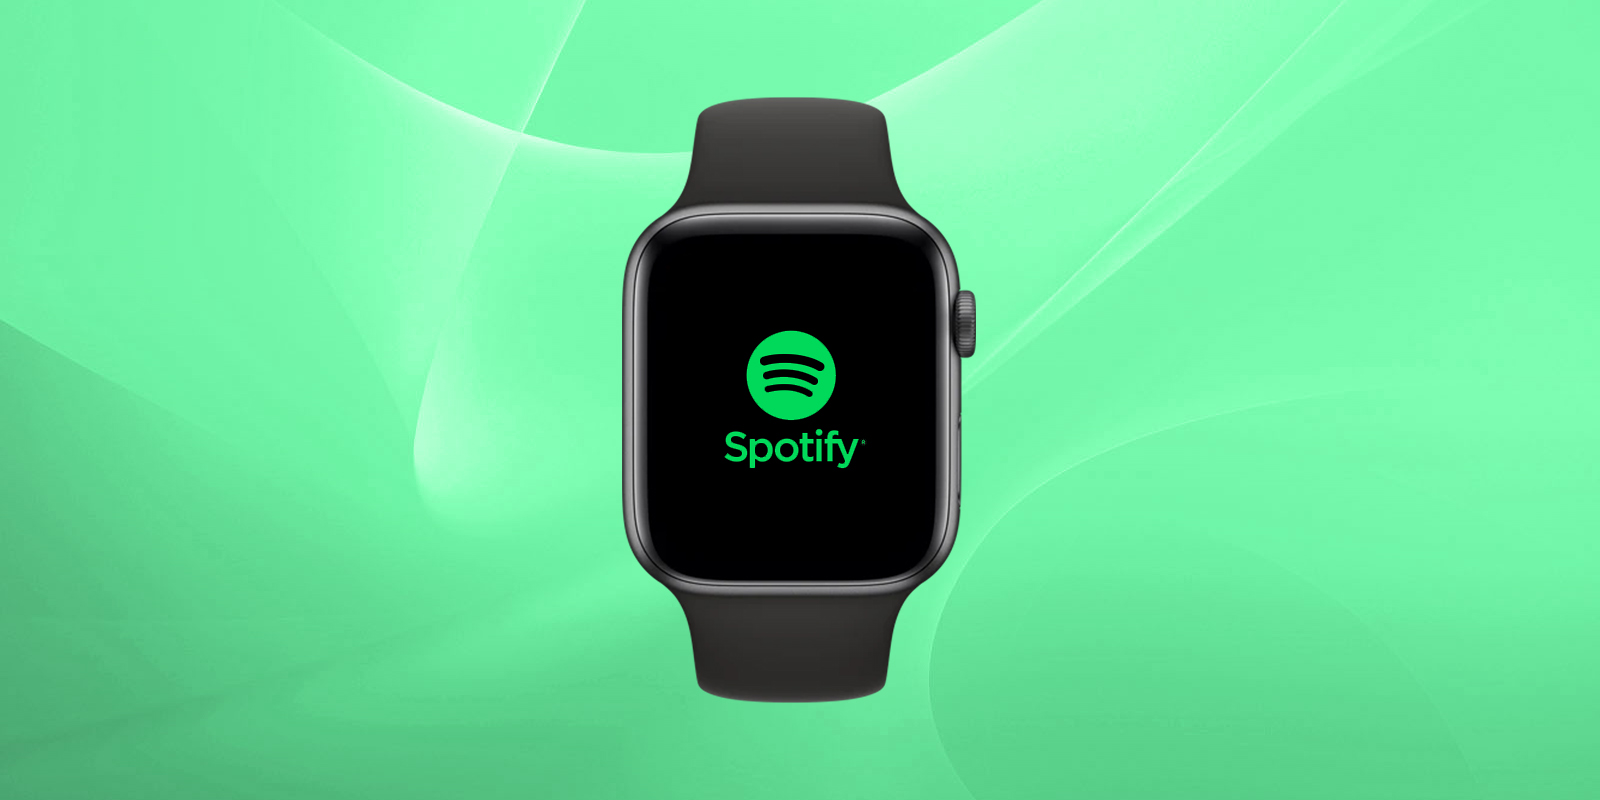 Spotify Now Lets You Stream Music On The Apple Watch Without The Phone